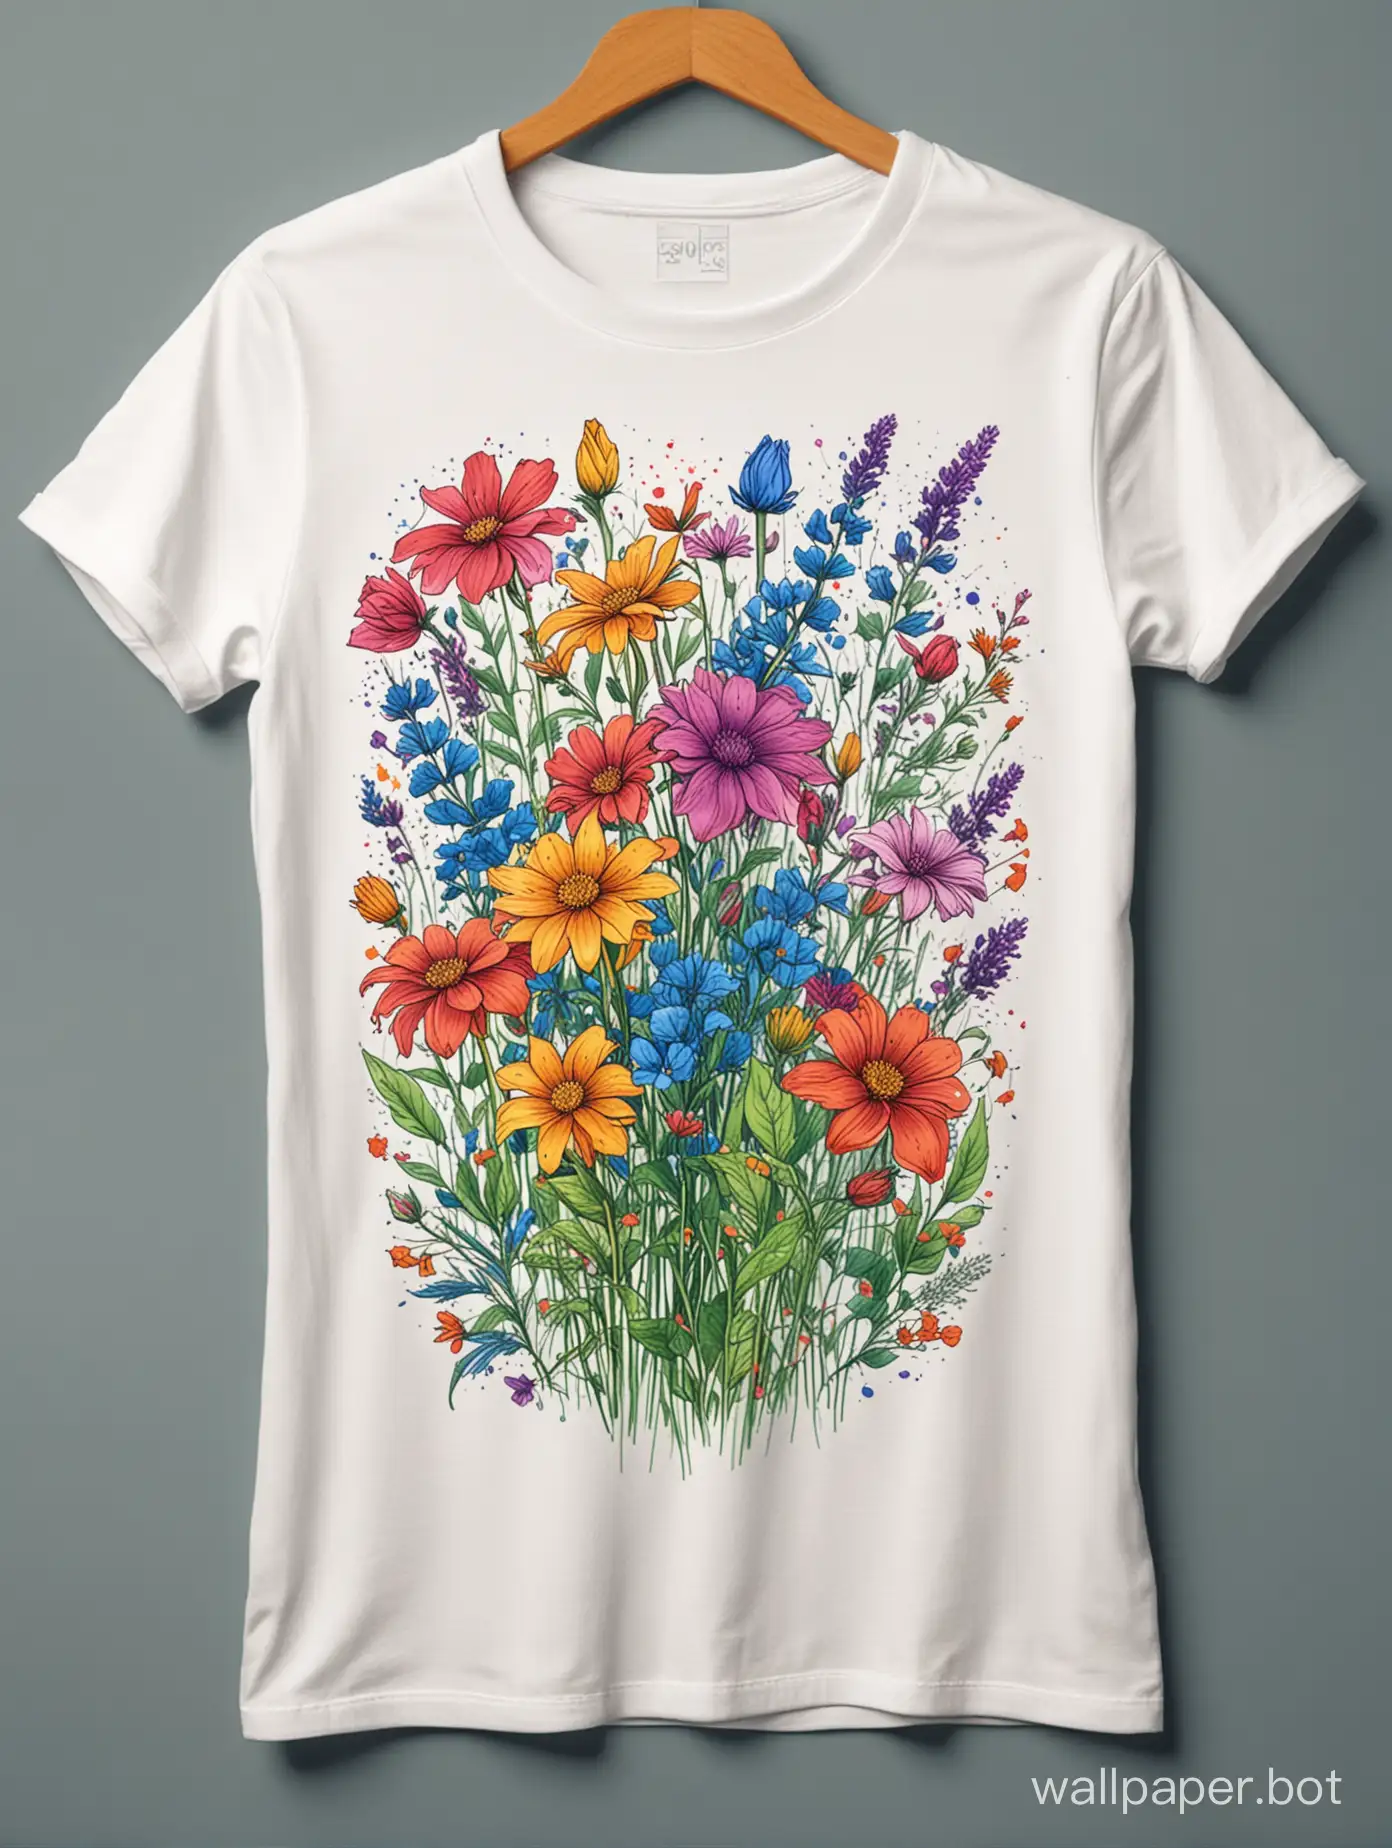 t shirt female mockup template, shirt, botanical art style, colorful abstract wildflowers, lineart illustration on shirt, duocolor lineart, explosive colors